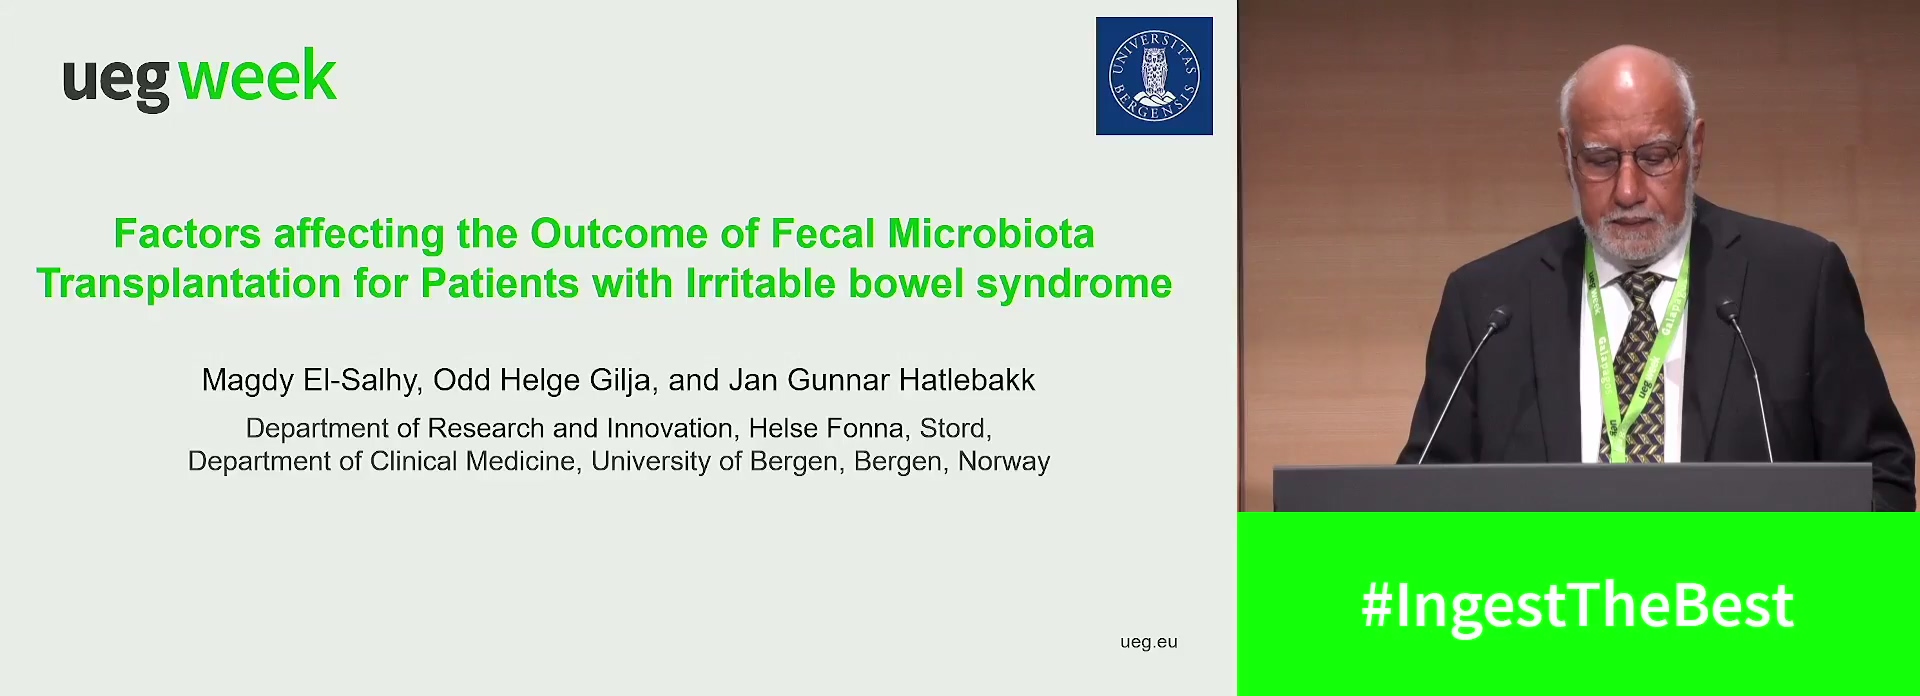 FACTORS AFFECTING THE OUTCOME OF FECAL MICROBIOTA TRANSPLANTATION FOR PATIENTS WITH IRRITABLE BOWEL SYNDROME